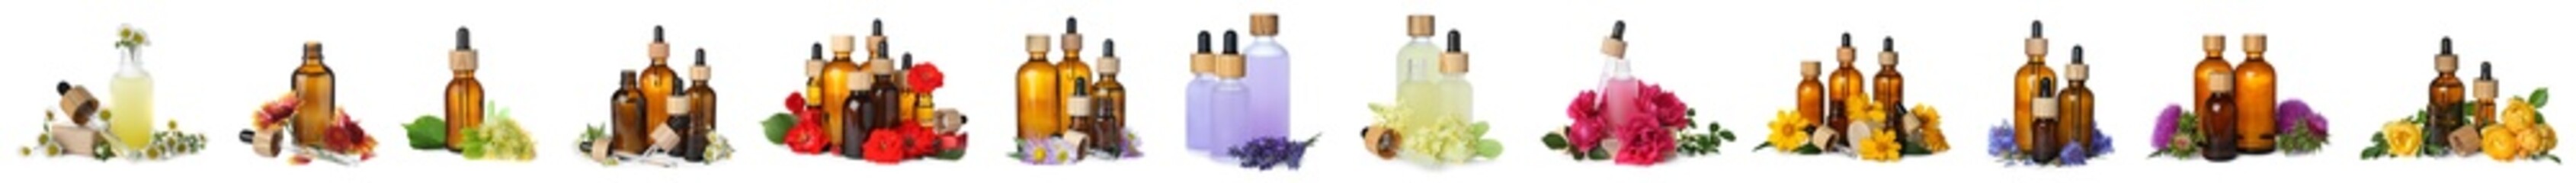 Set with different natural essential oils and flowers on white background. Banner design